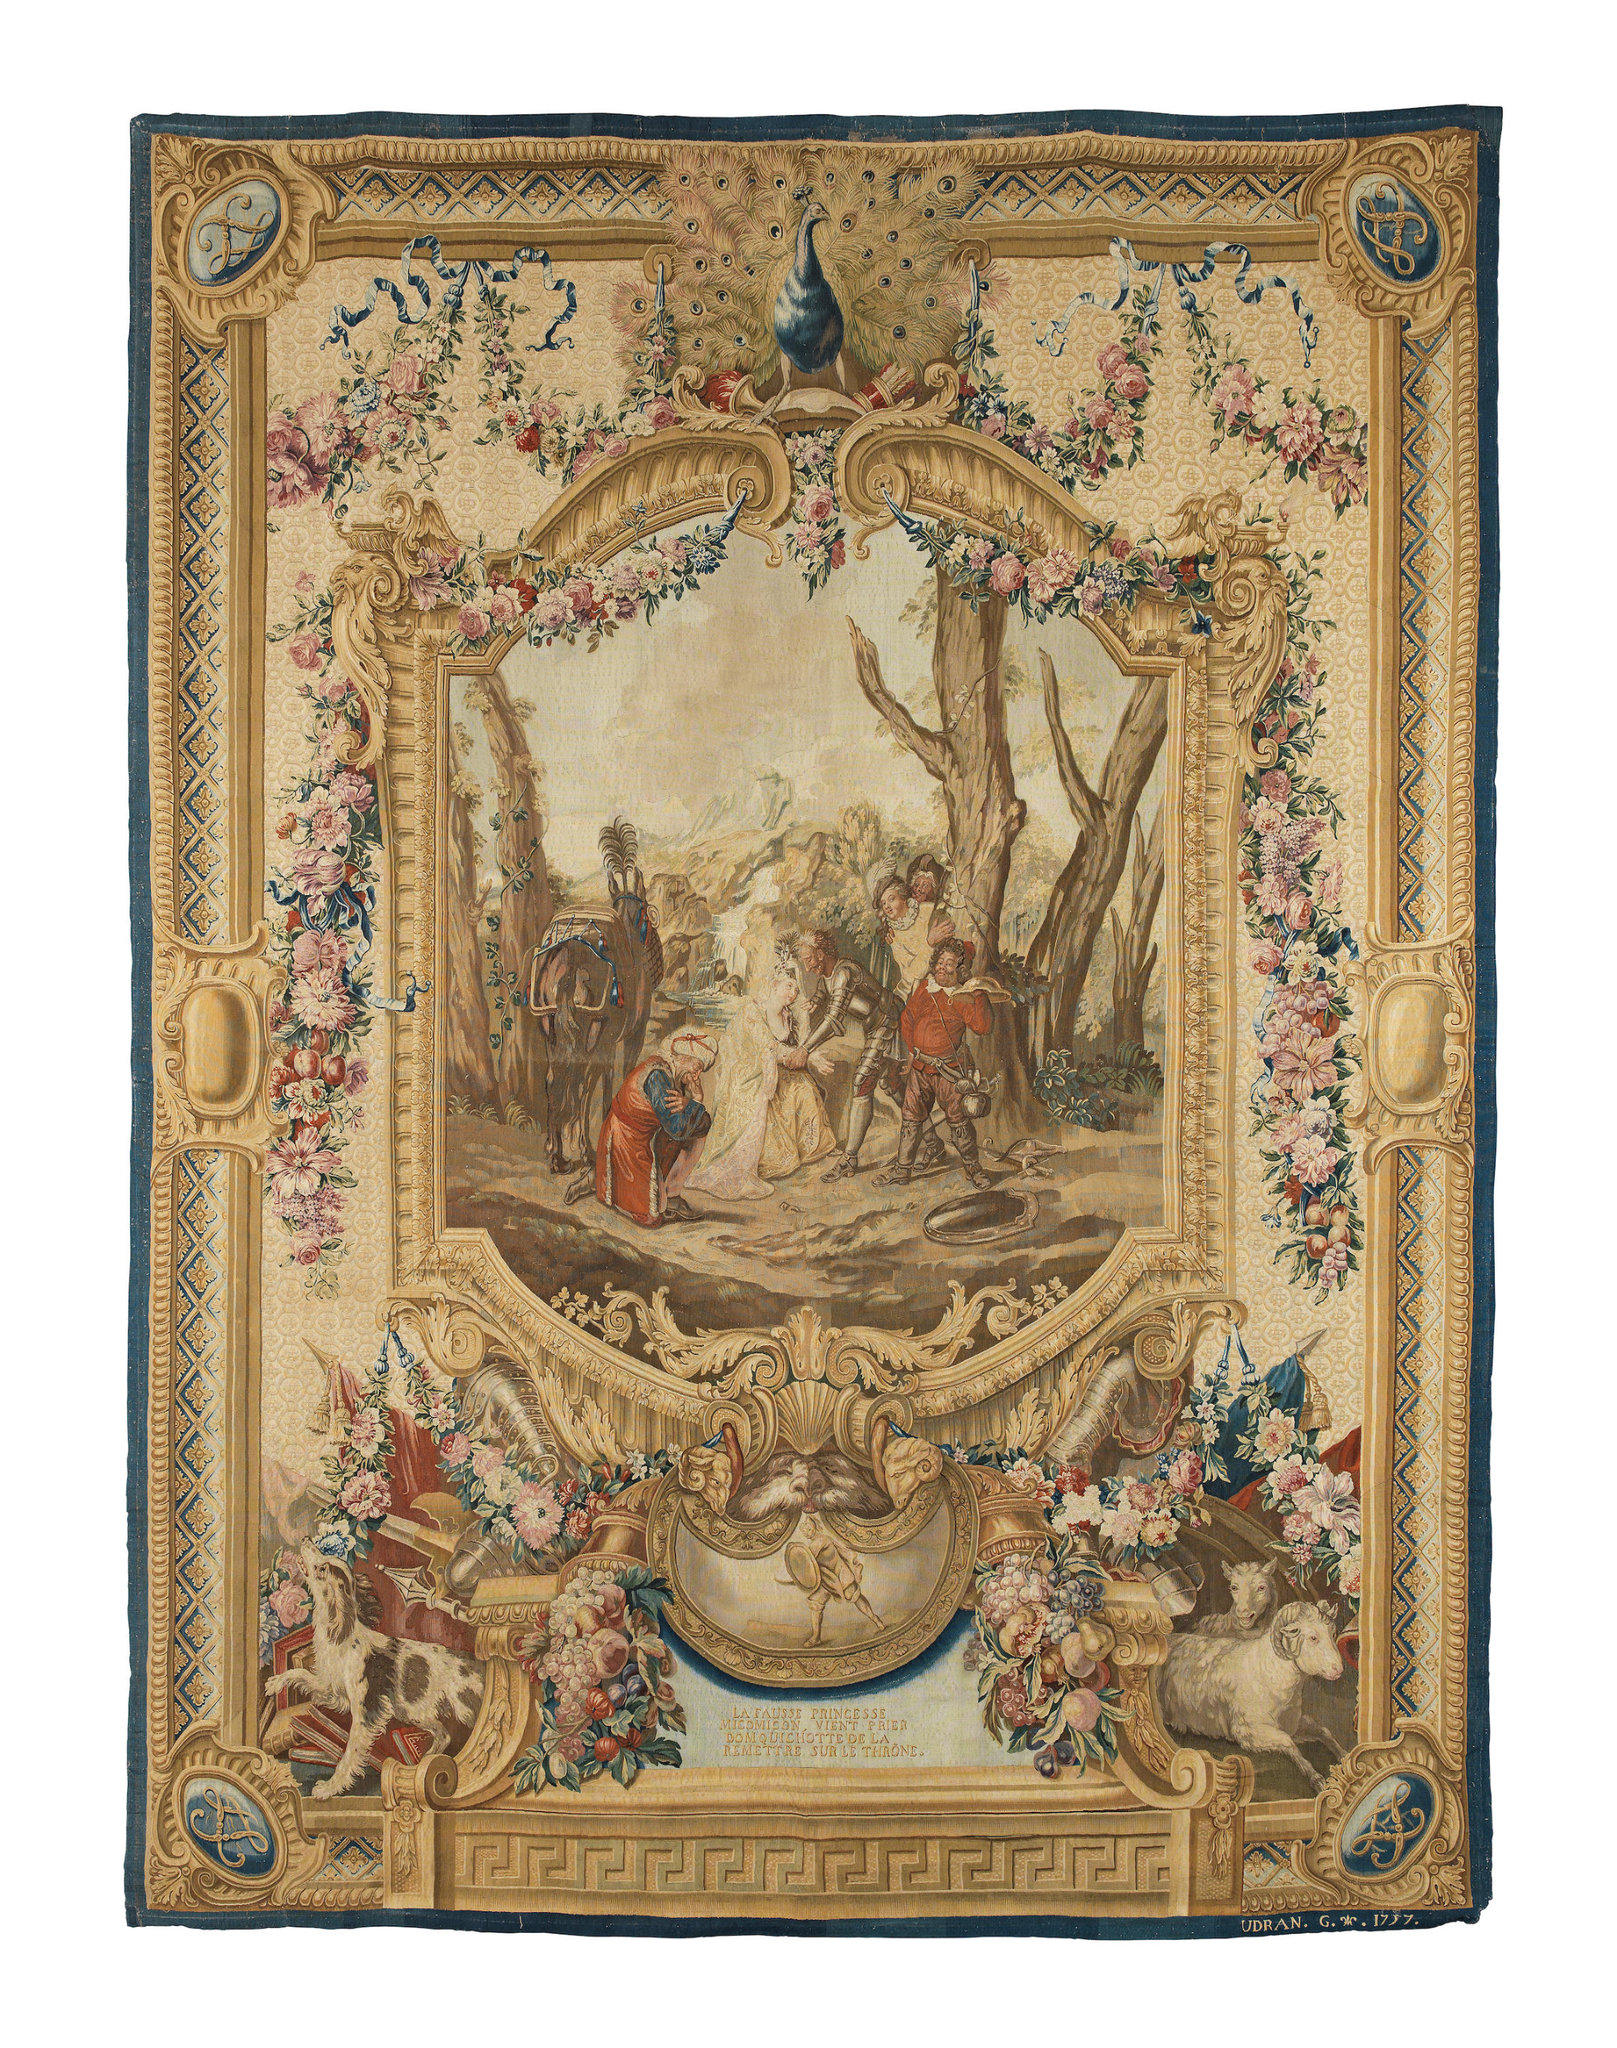 A Royal Louis XV Literary Tapestry, from the Story of Don